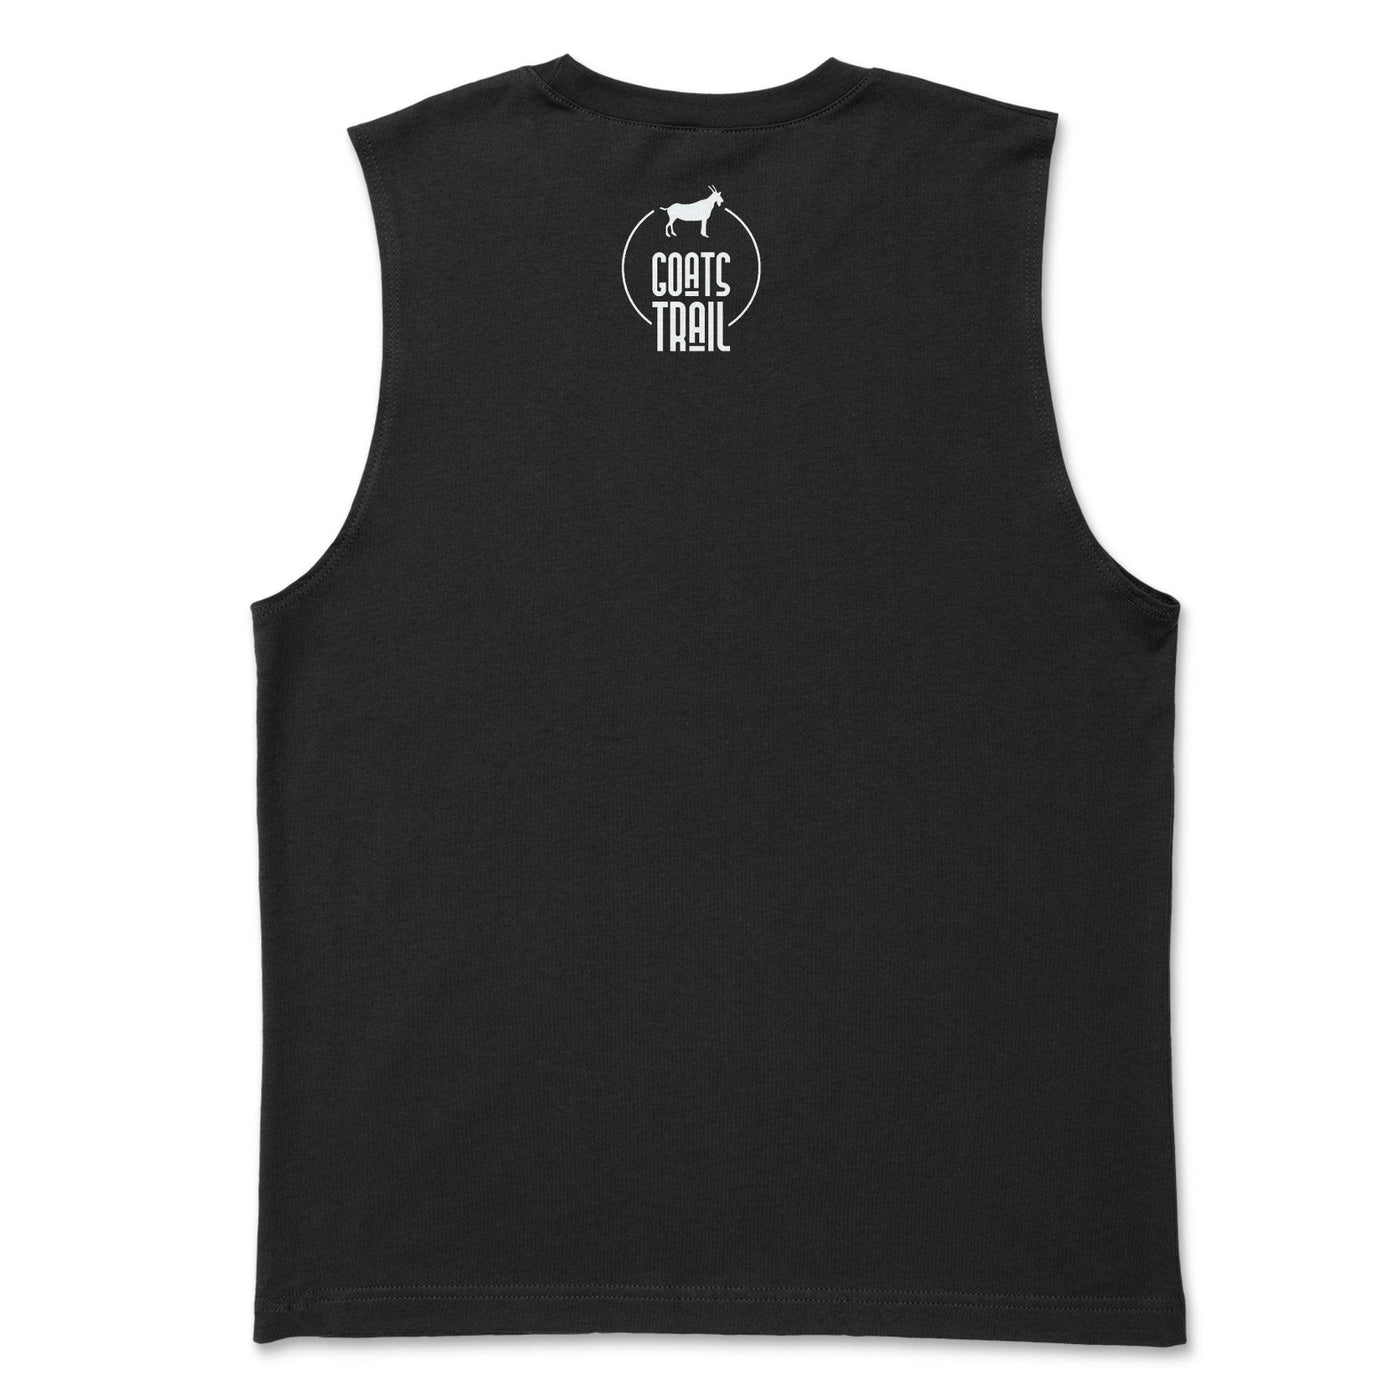 Give It Some Skinny Pedal Muscle Tank Top - Goats Trail